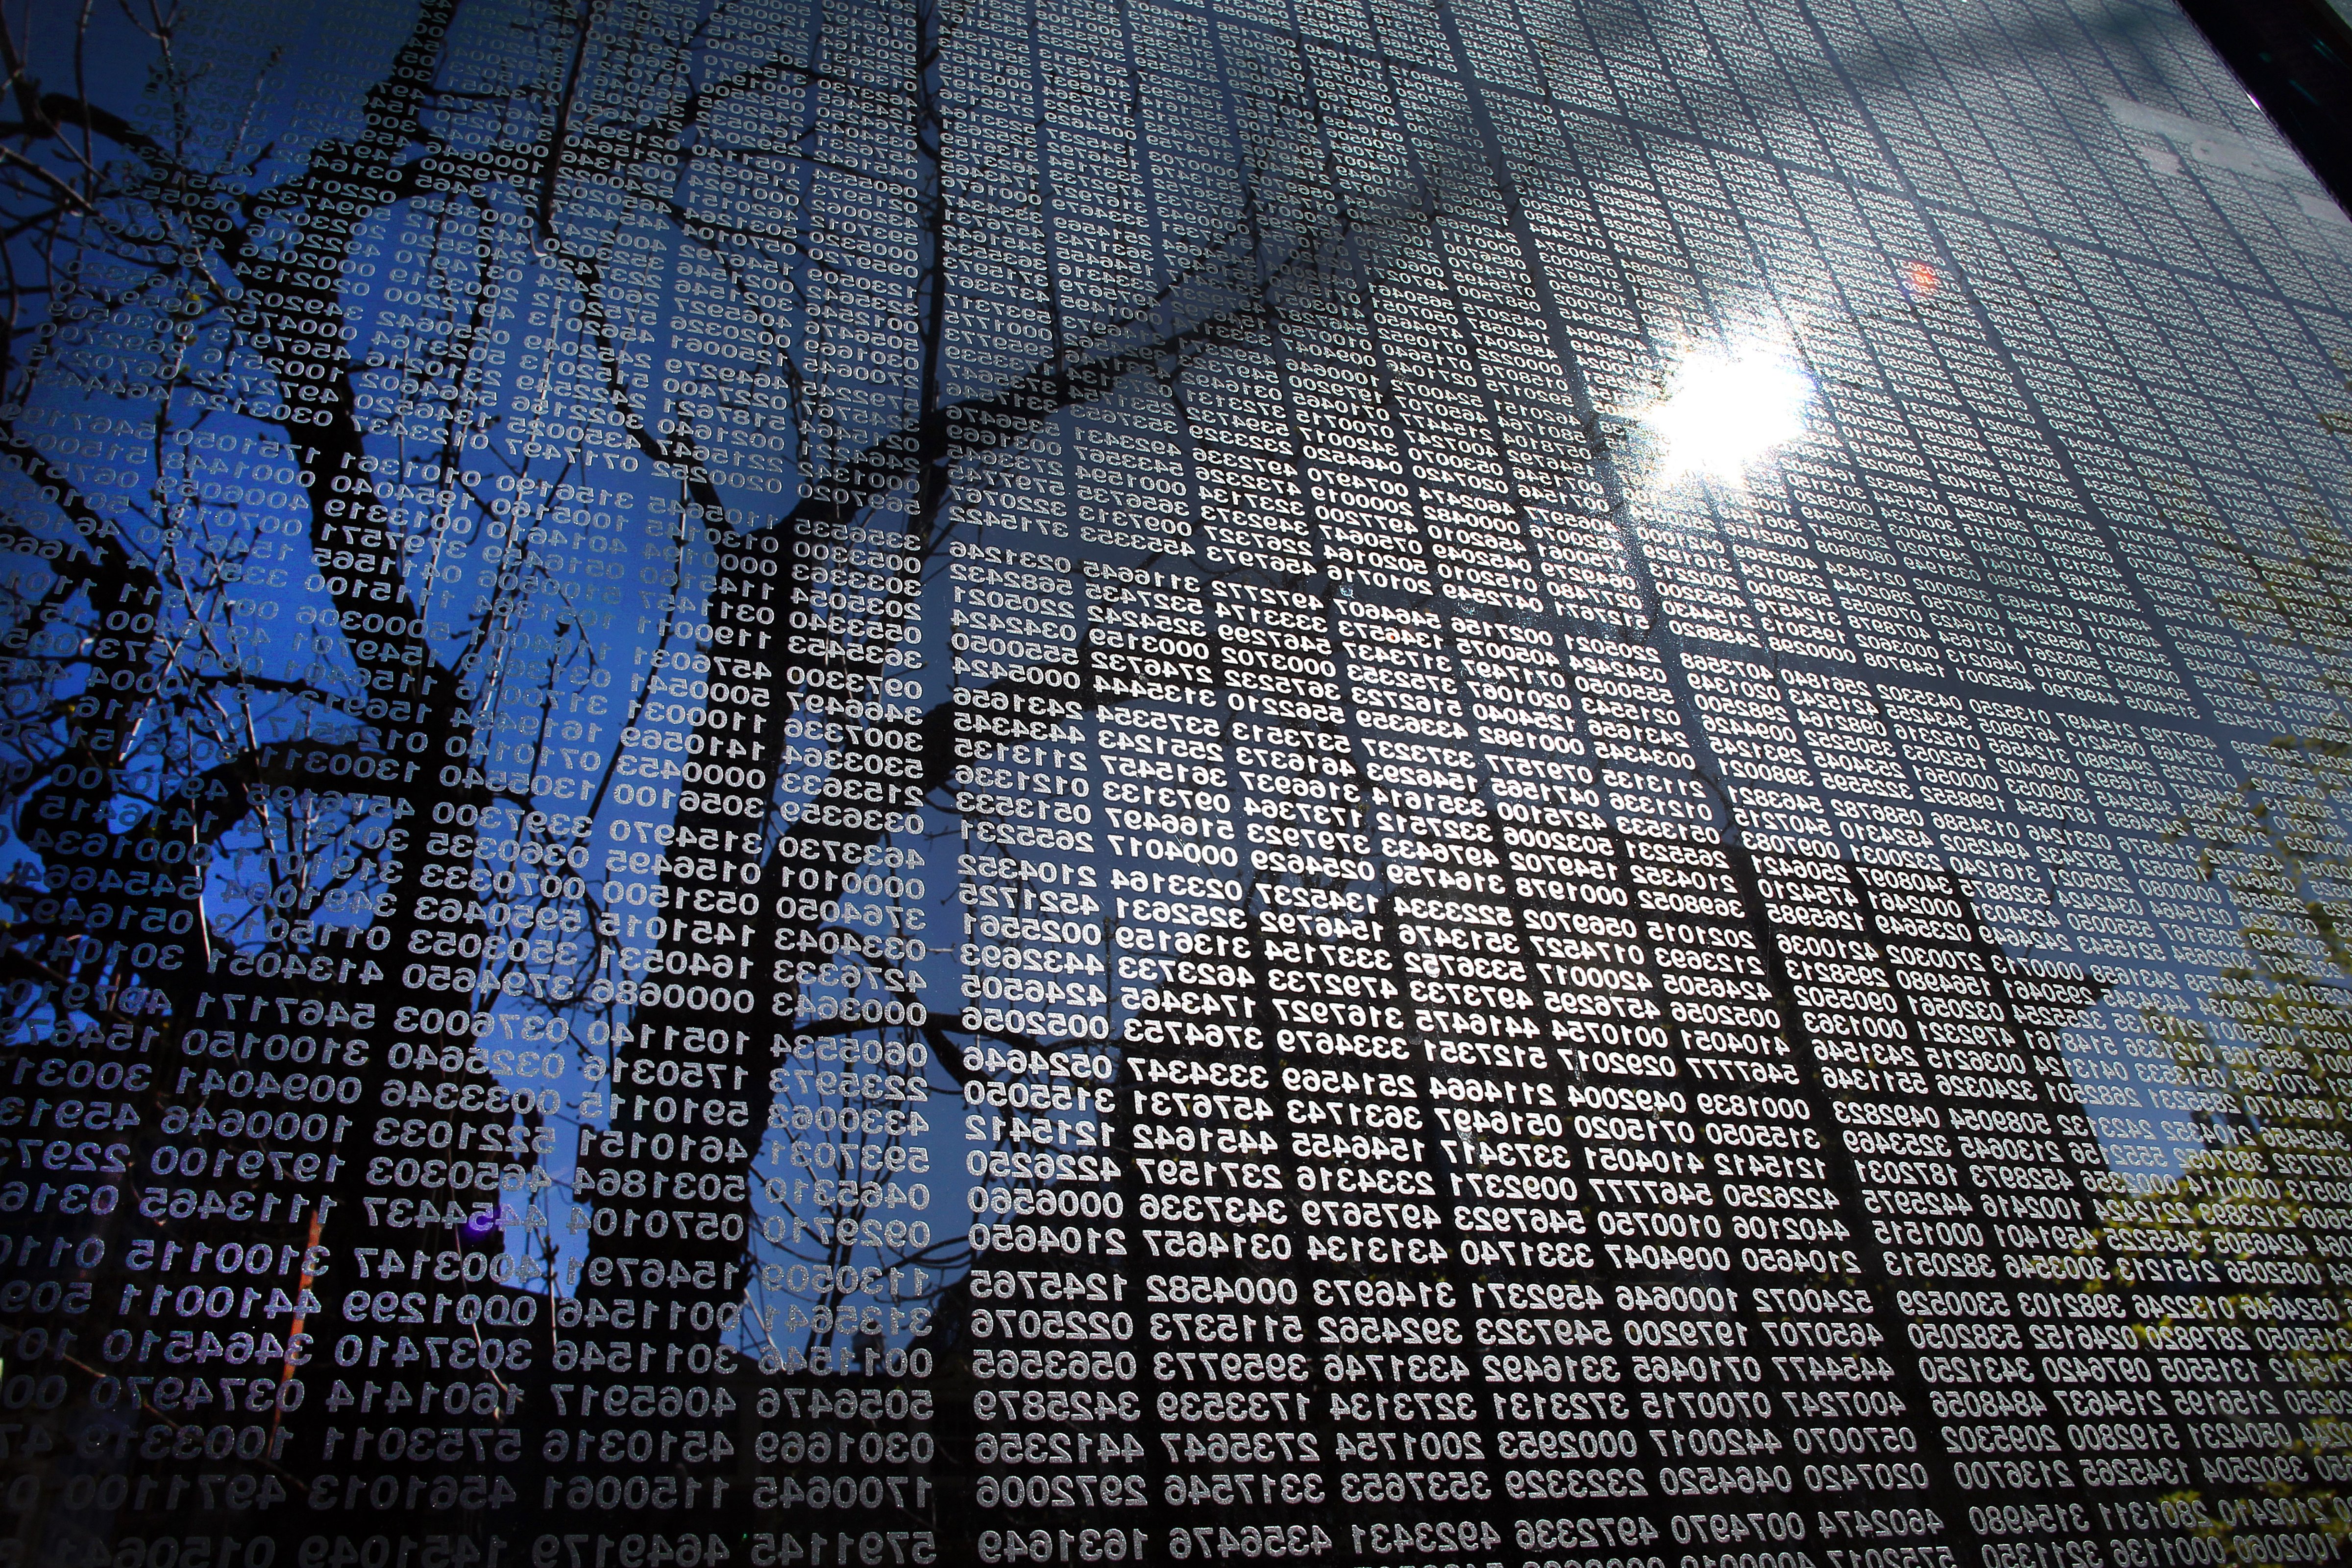 The early-morning suns shines onto the thousands of numbers of Holocaust victims on one of the glass panels at the New England Holocaust Memorial in Boston. (John Tlumacki—The Boston Globe/Getty Images)